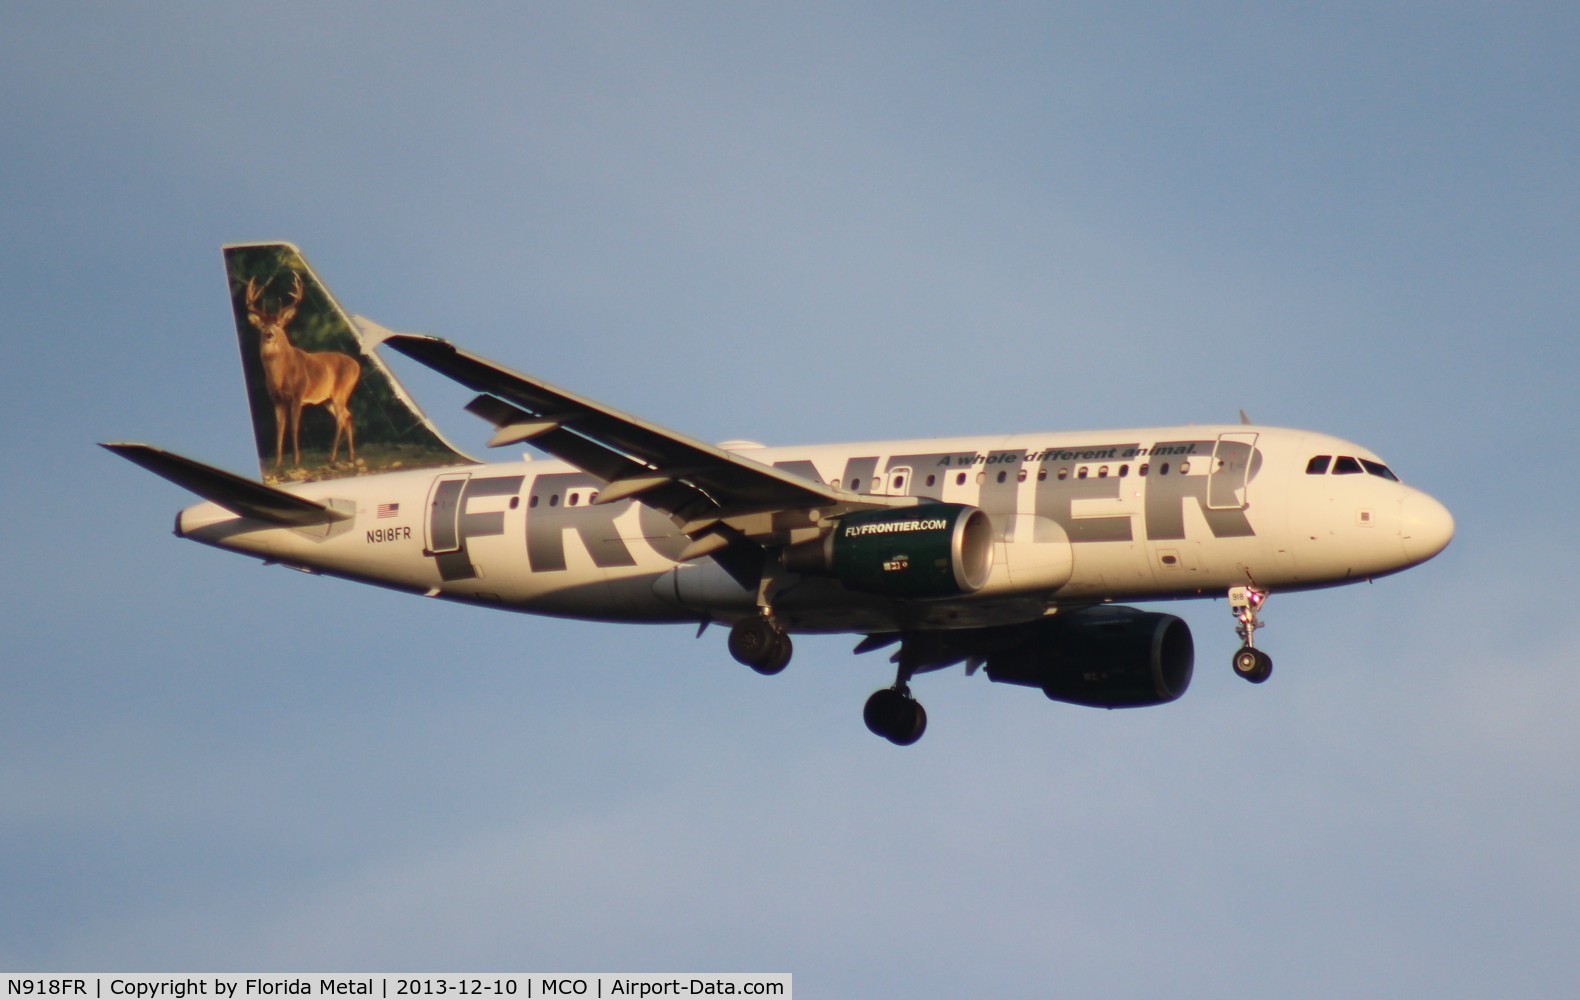 N918FR, 2003 Airbus A319-111 C/N 1943, Frontier Jake the White Tail A319